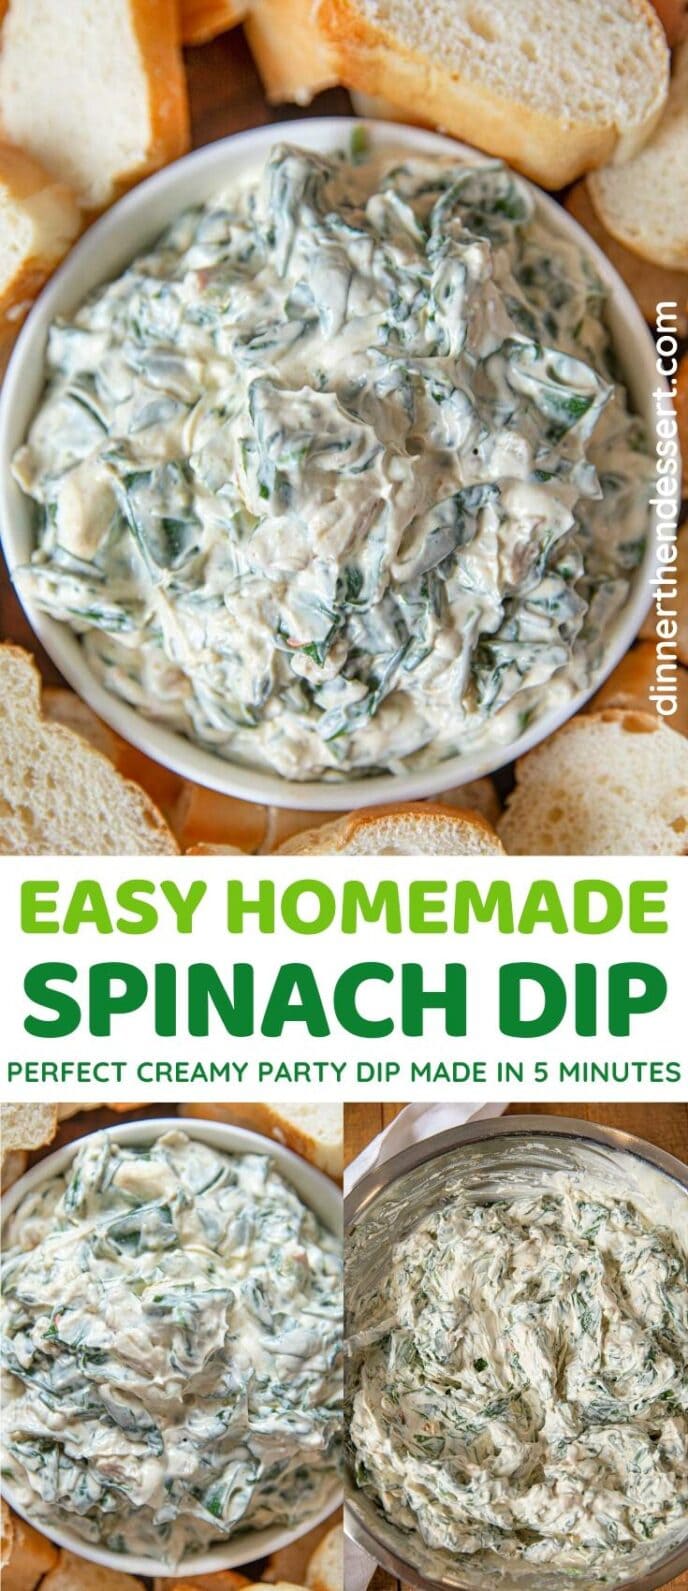 Easy Spinach Dip collage